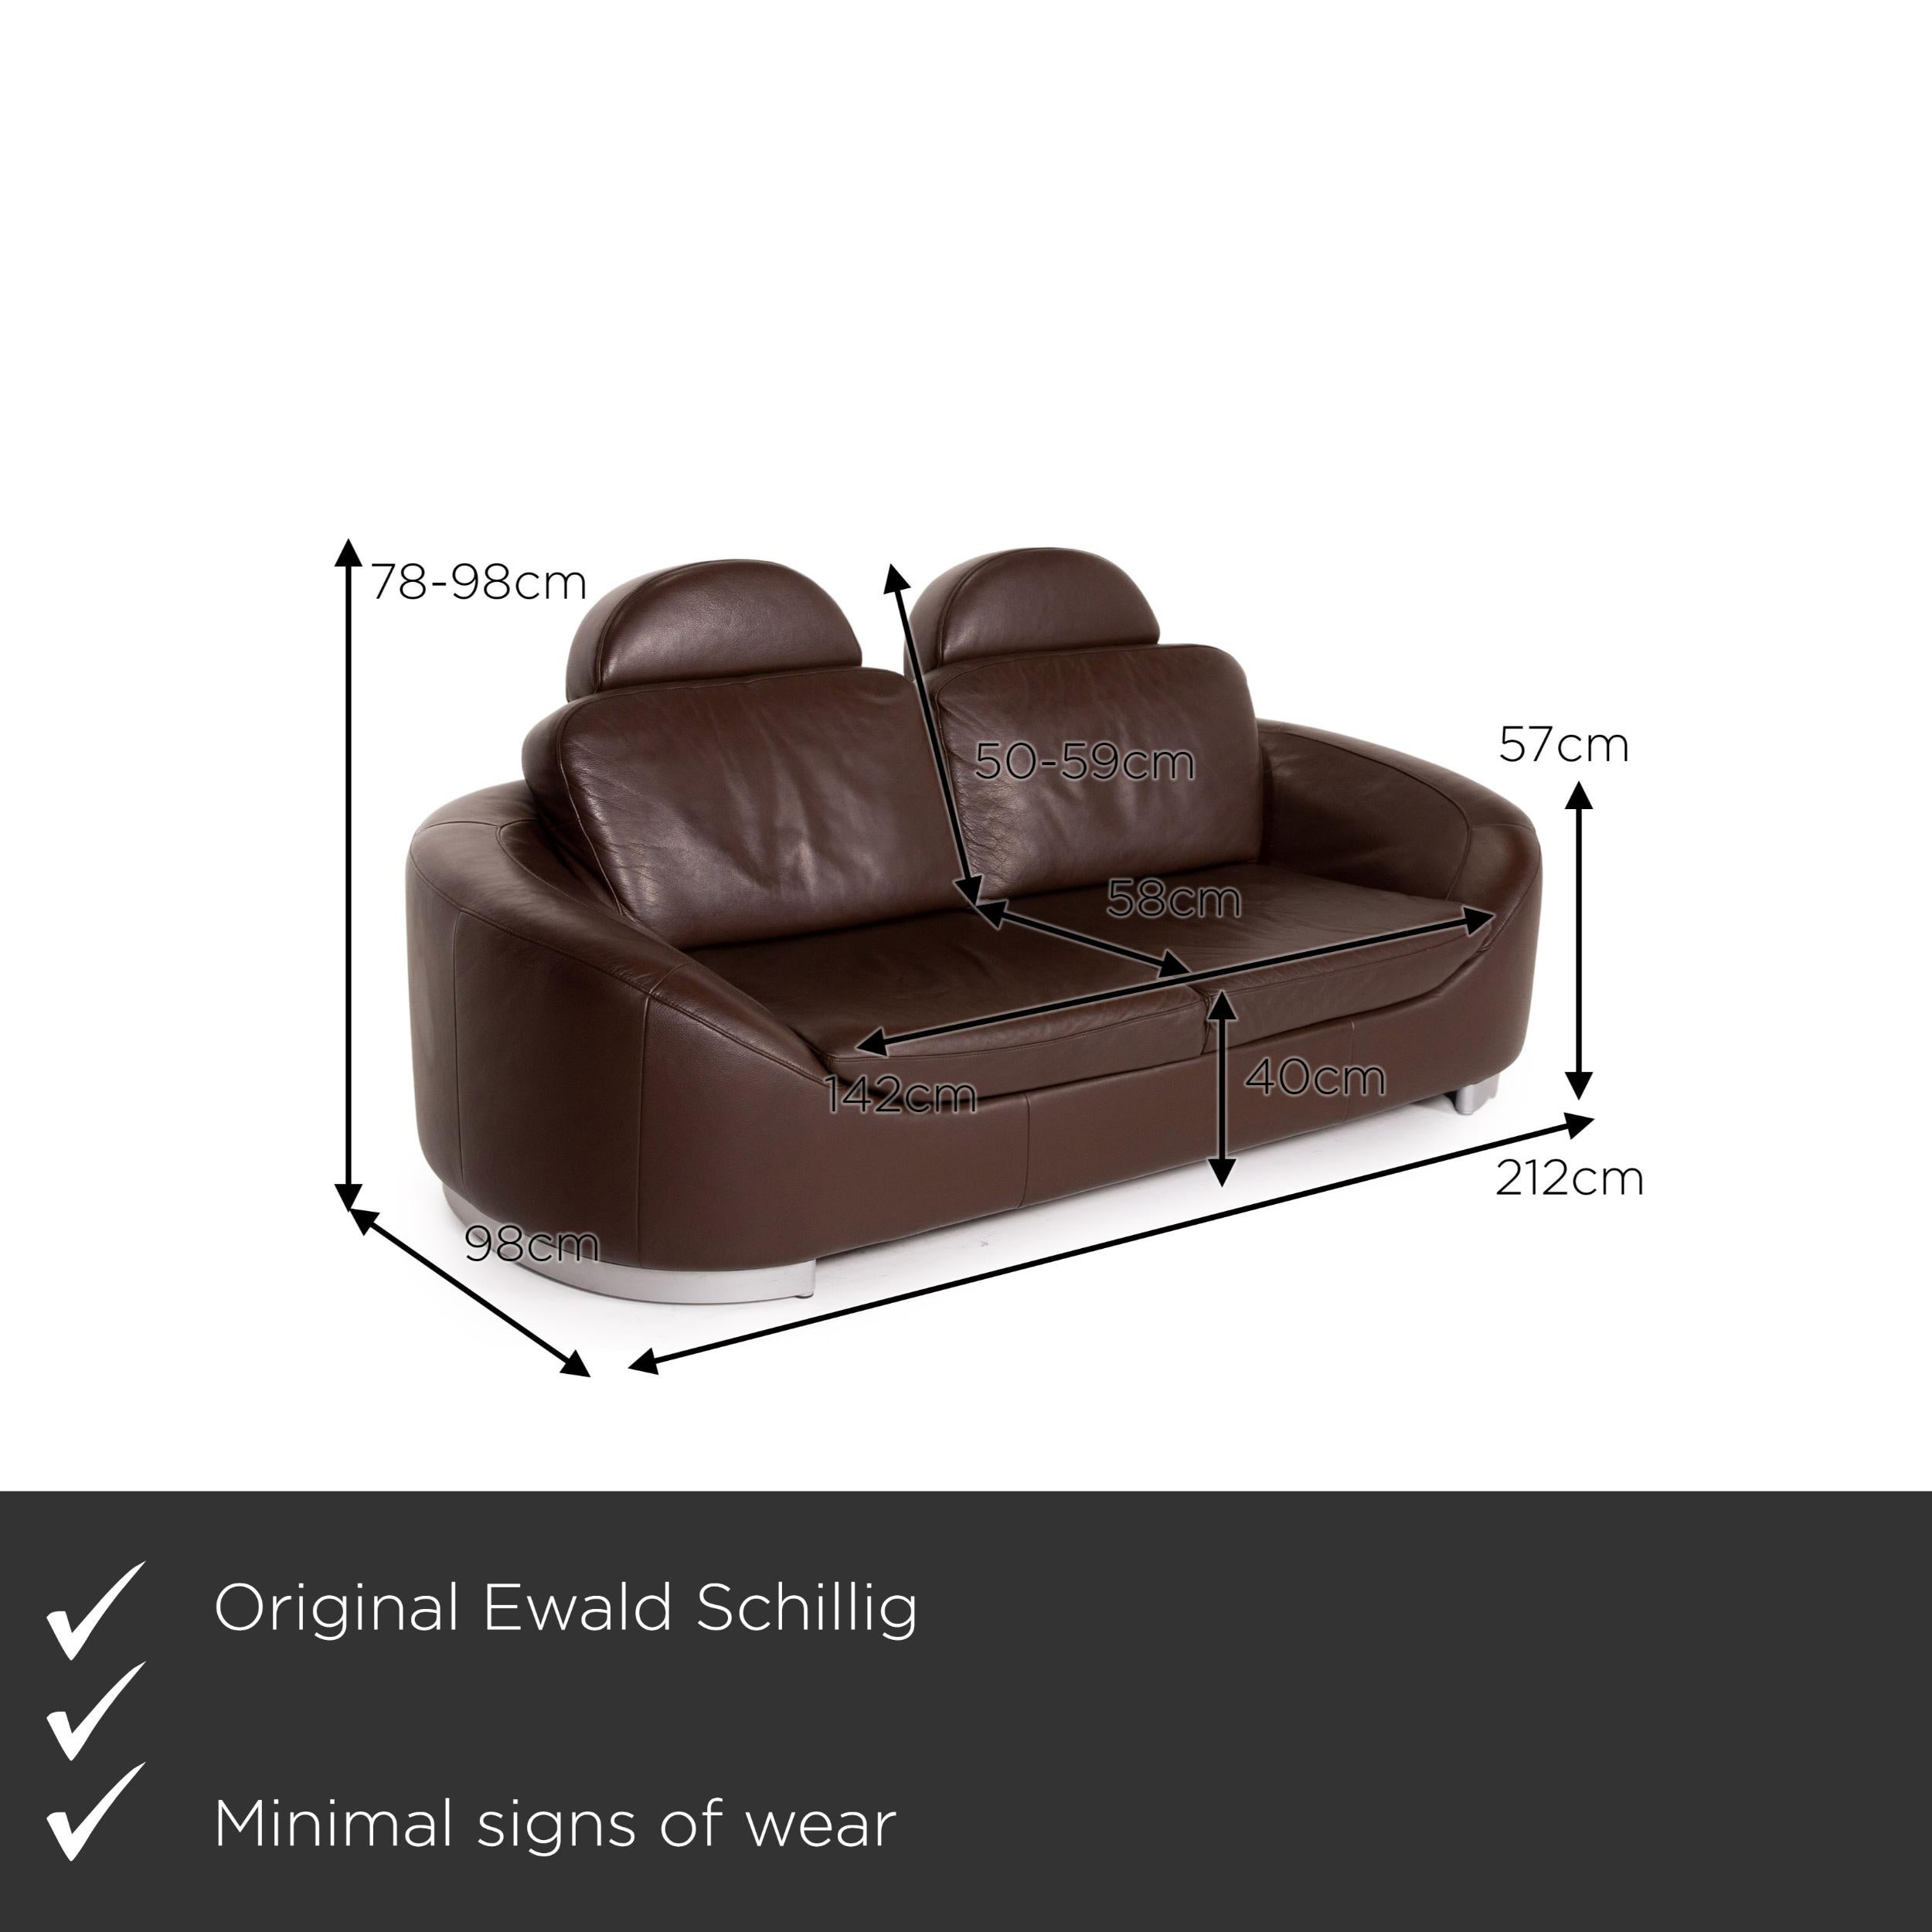 We present to you an Ewald Schillig leather sofa brown dark brown two-seater couch.
 
 

 Product measurements in centimeters:
 

Depth 98
Width 212
Height 98
Seat height 40
Rest height 57
Seat depth 58
Seat width 142
Back height 59.